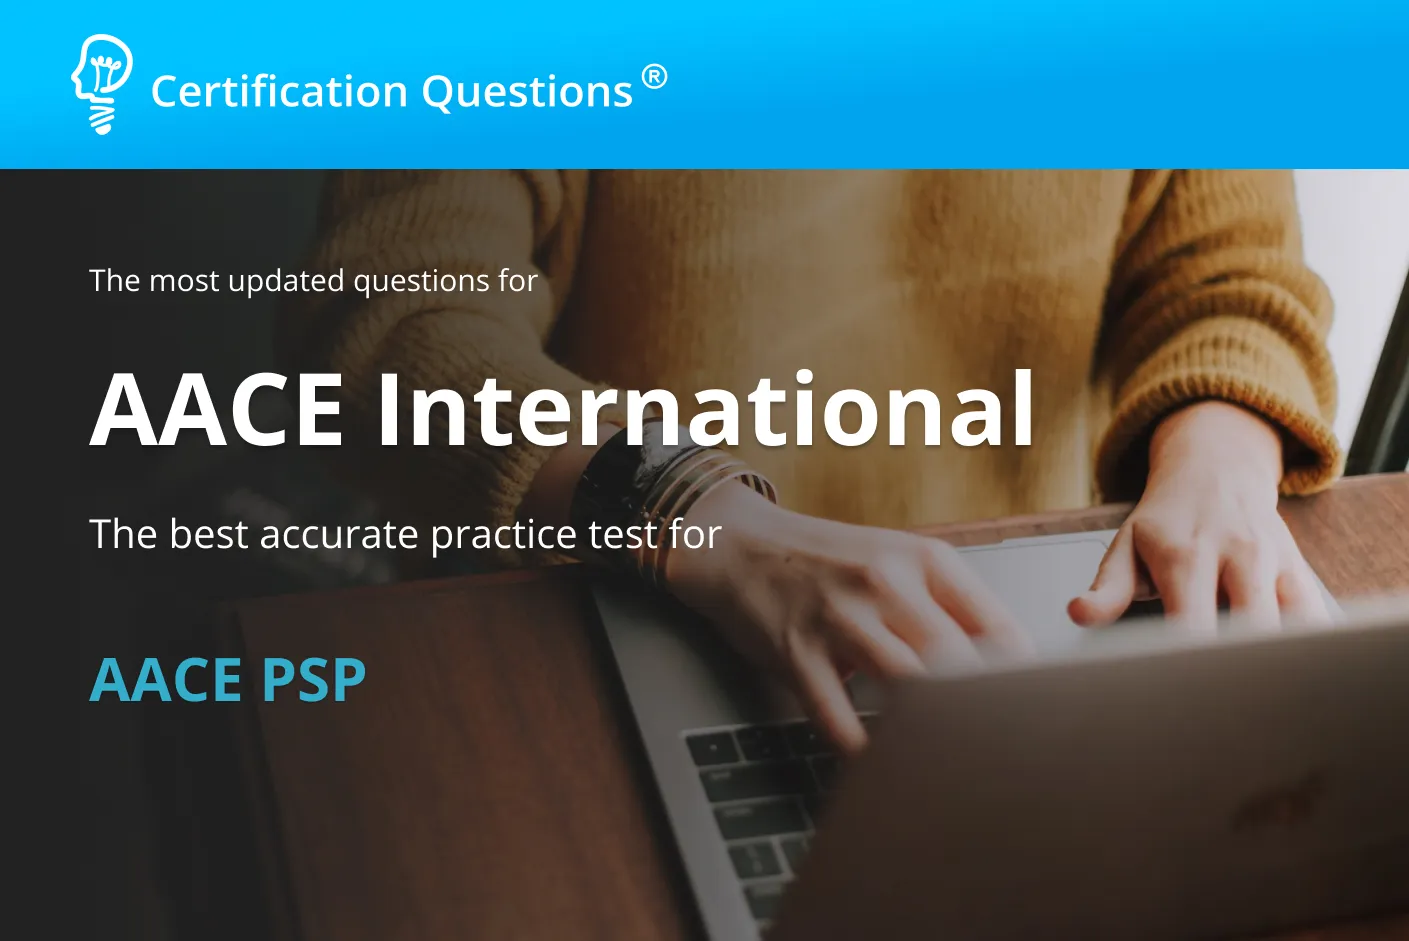 This image represents the aace-psp exam practice questions